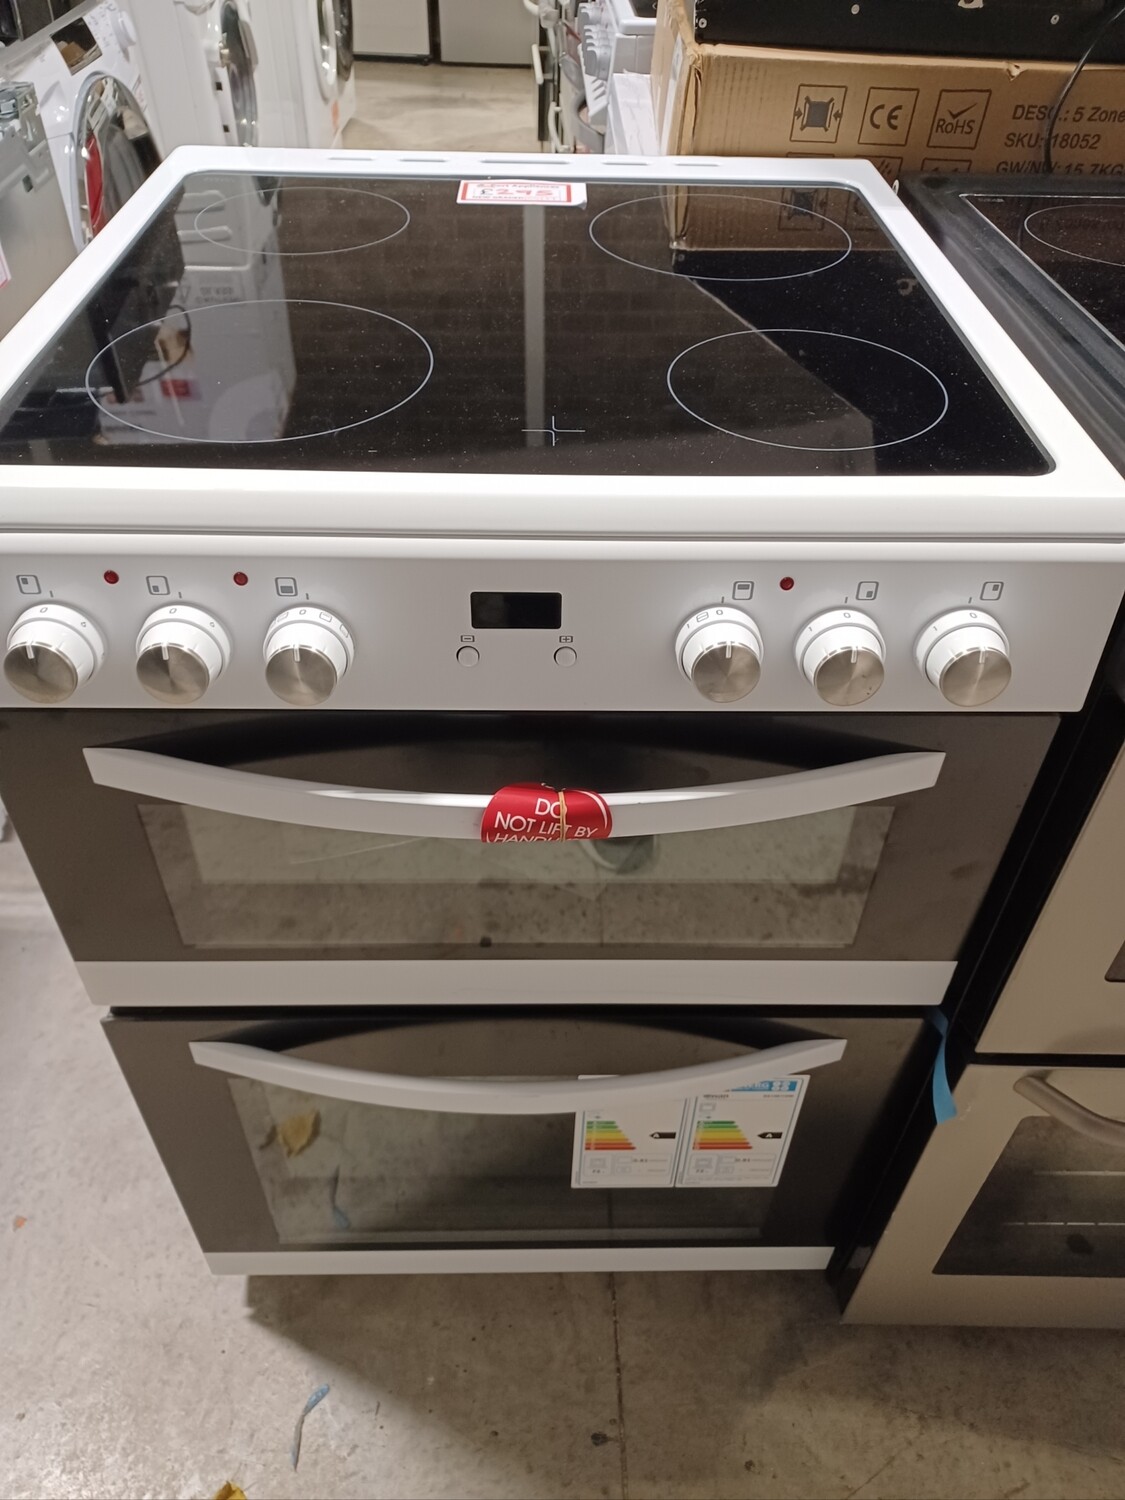 Swan SX158110W 60cm Electric Cooker Double Oven New Graded 12 month guarantee